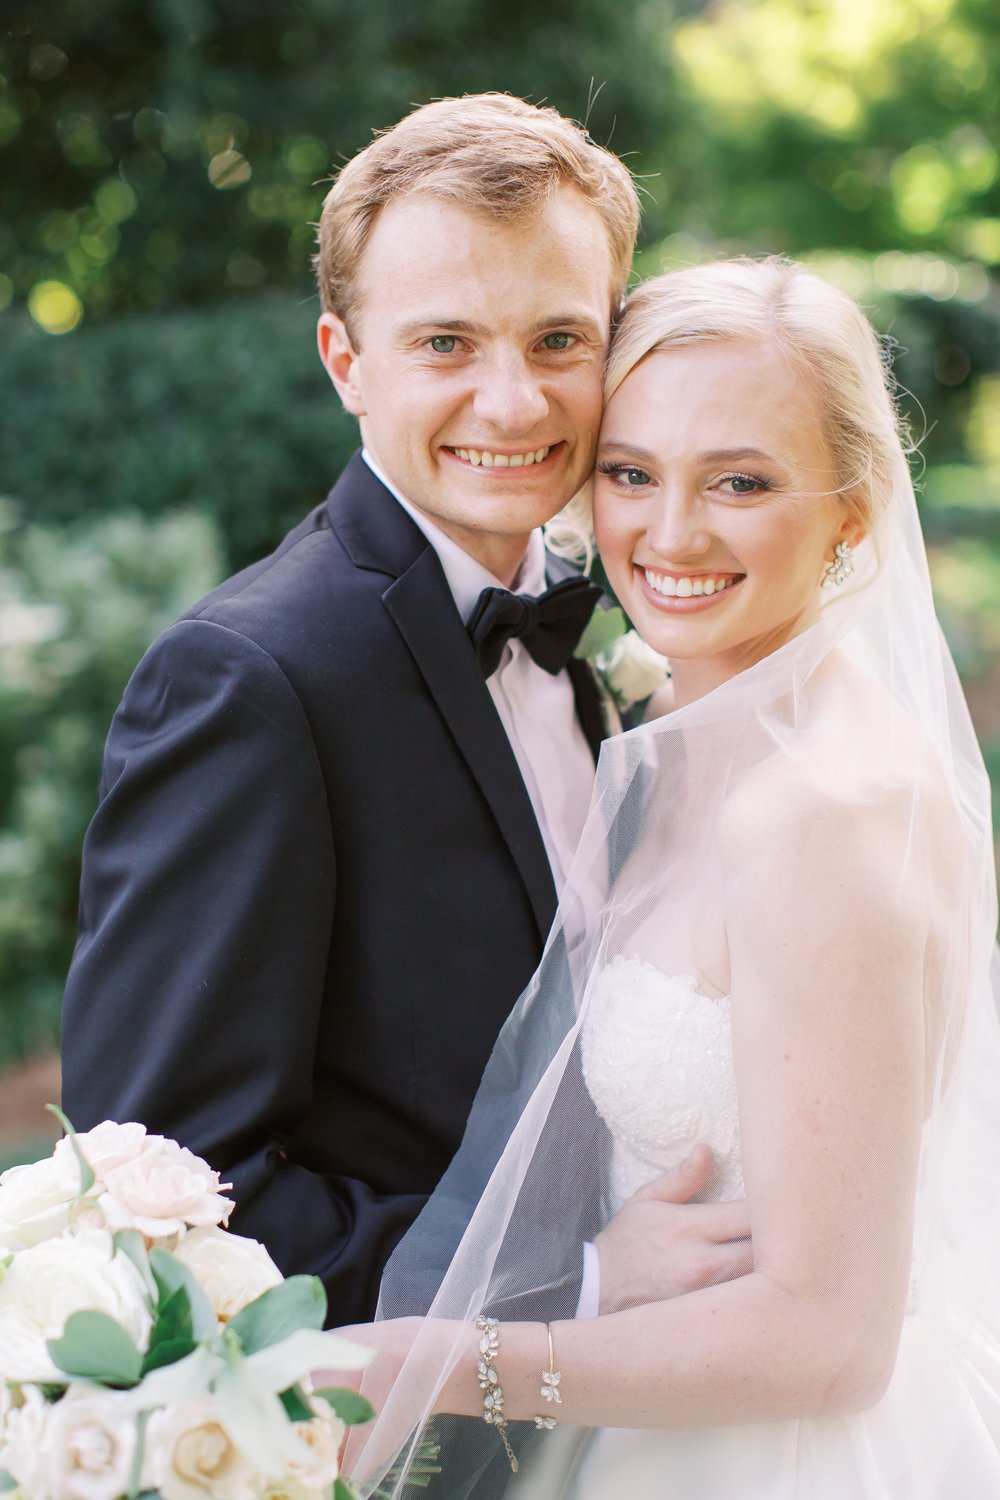 Classic bride and groom portrait wedding in charlotte